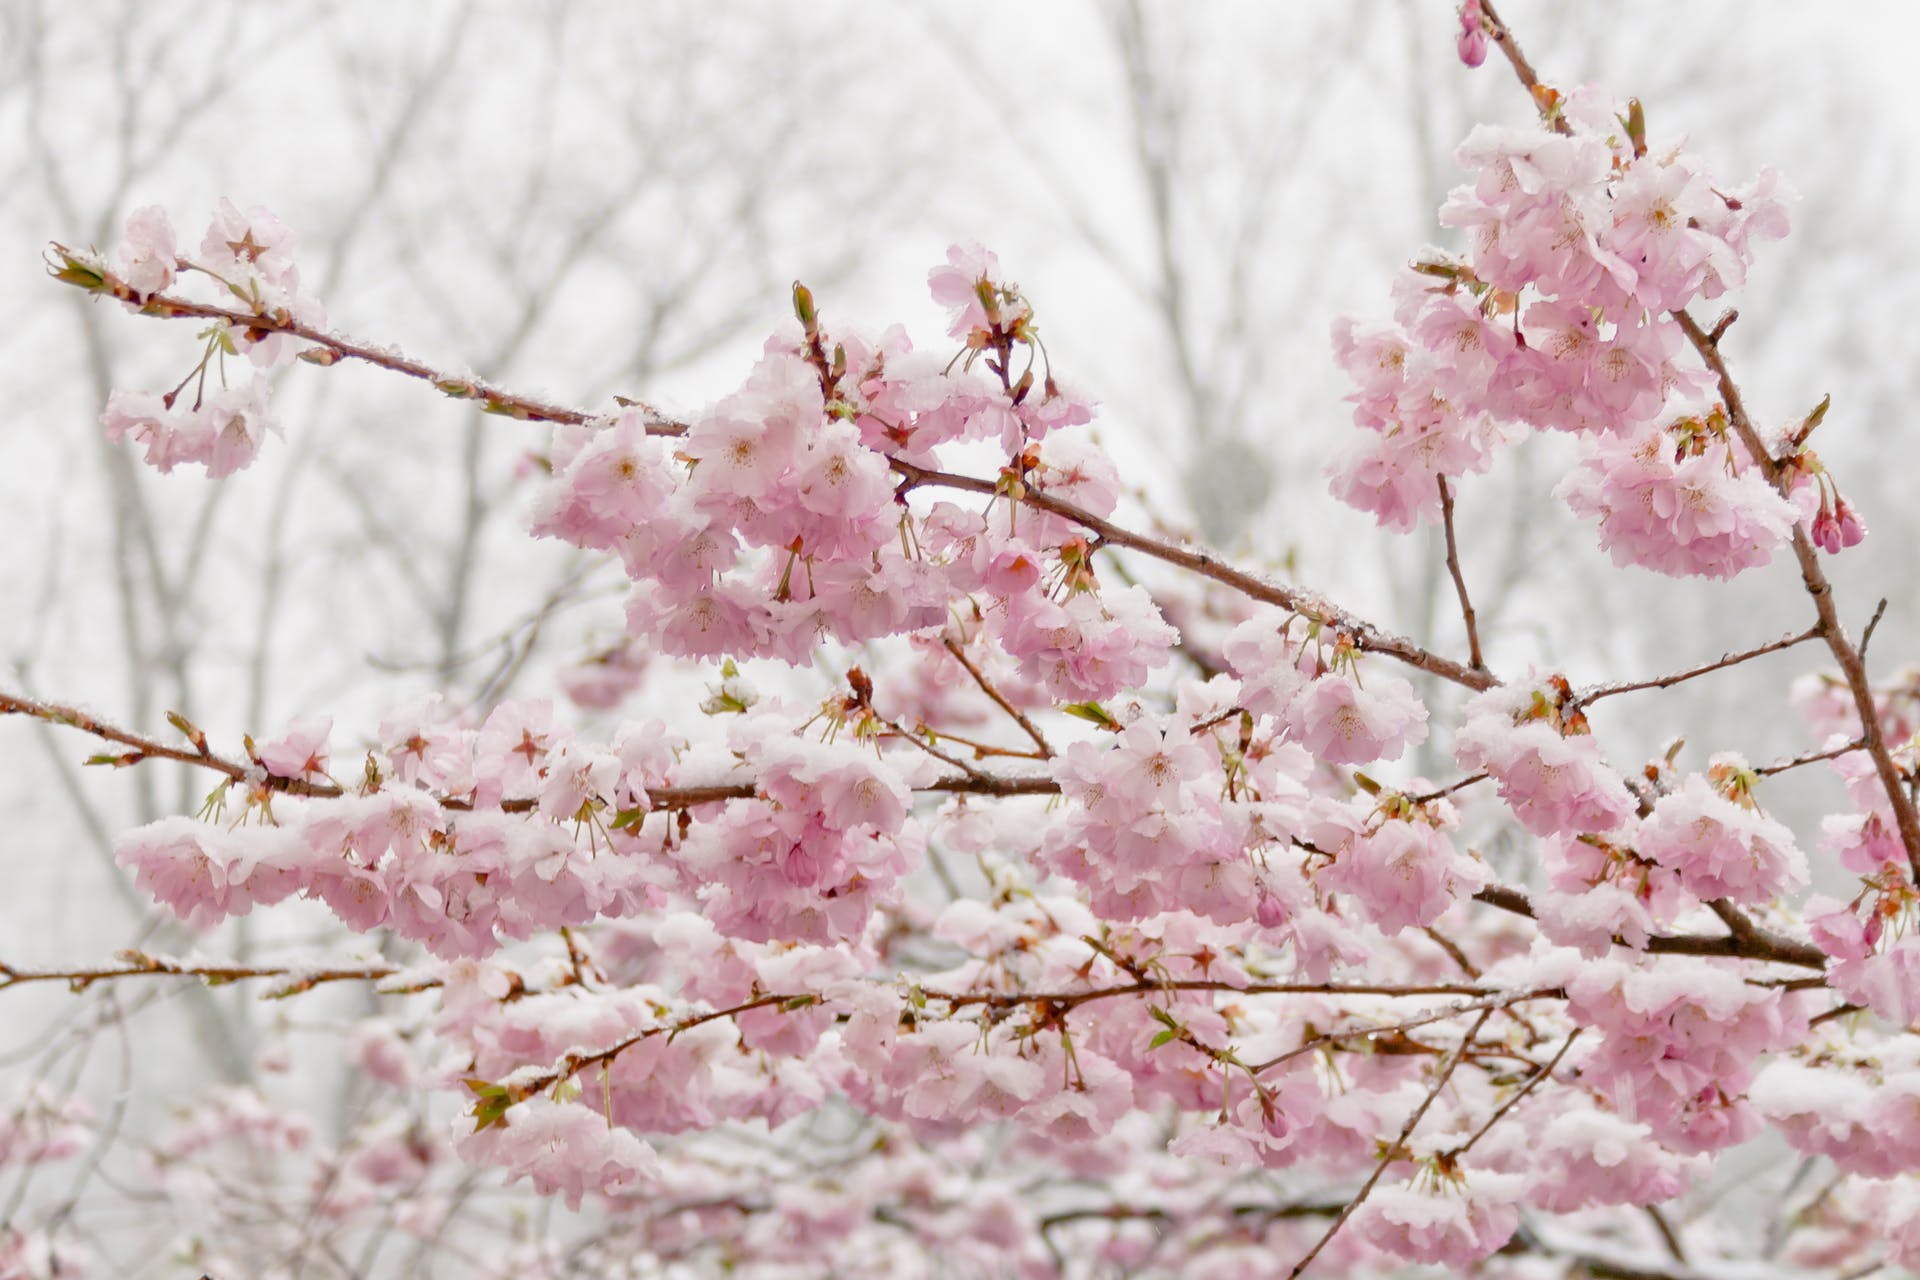 Flowering Cherry Blossom Cherry Blossoms Cold Cherry Snow Winter White